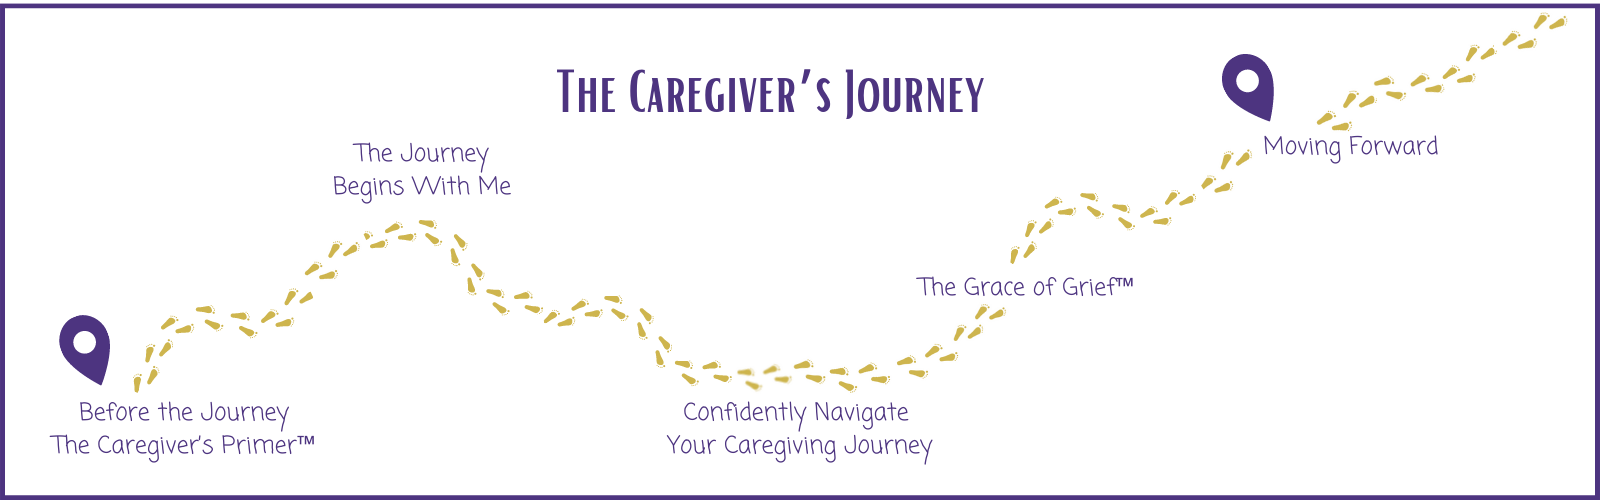 The Caregivers Journey Cover for Hubspot Cover